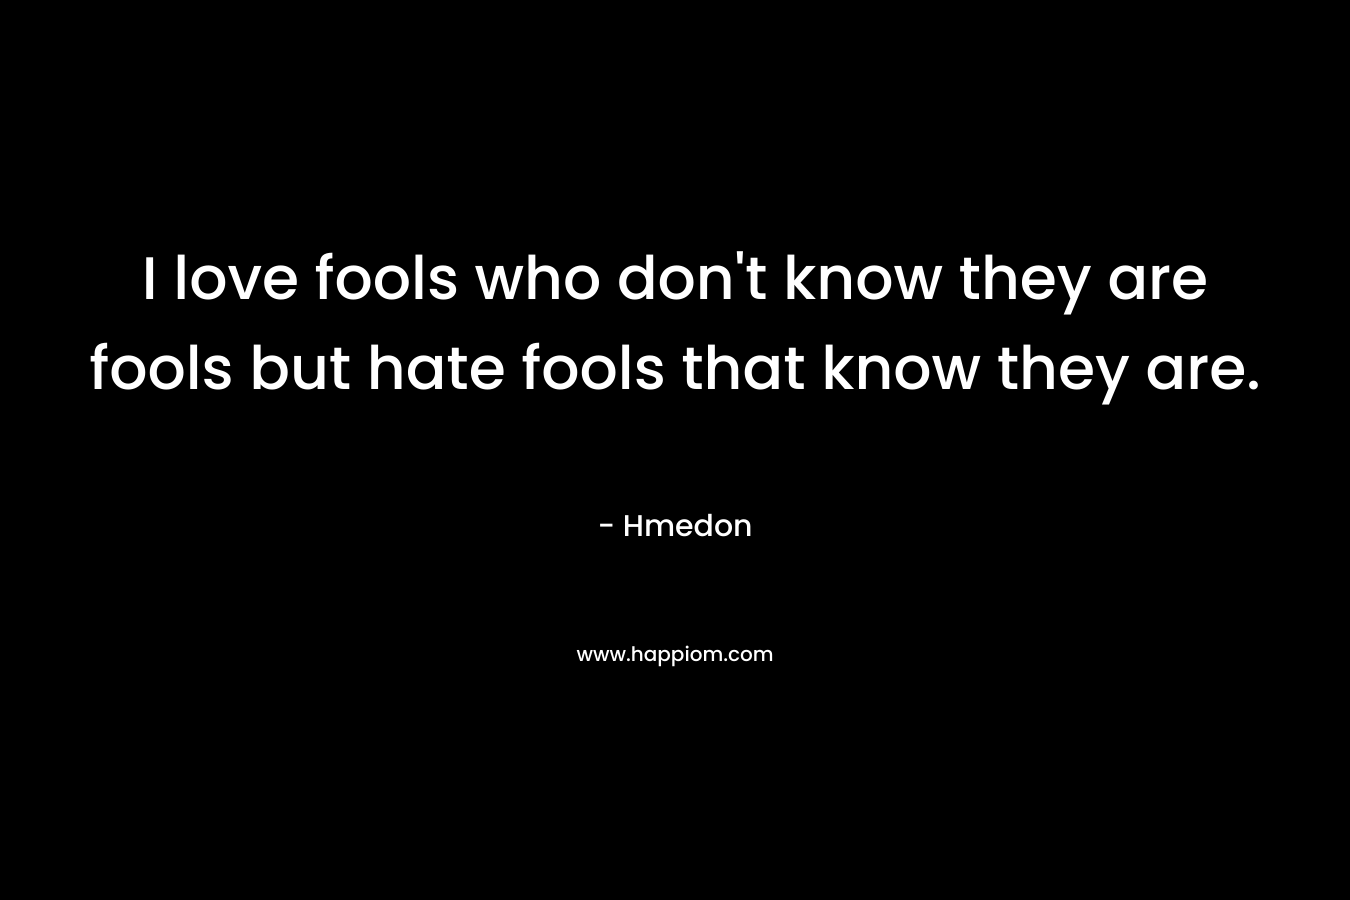 I love fools who don't know they are fools but hate fools that know they are.